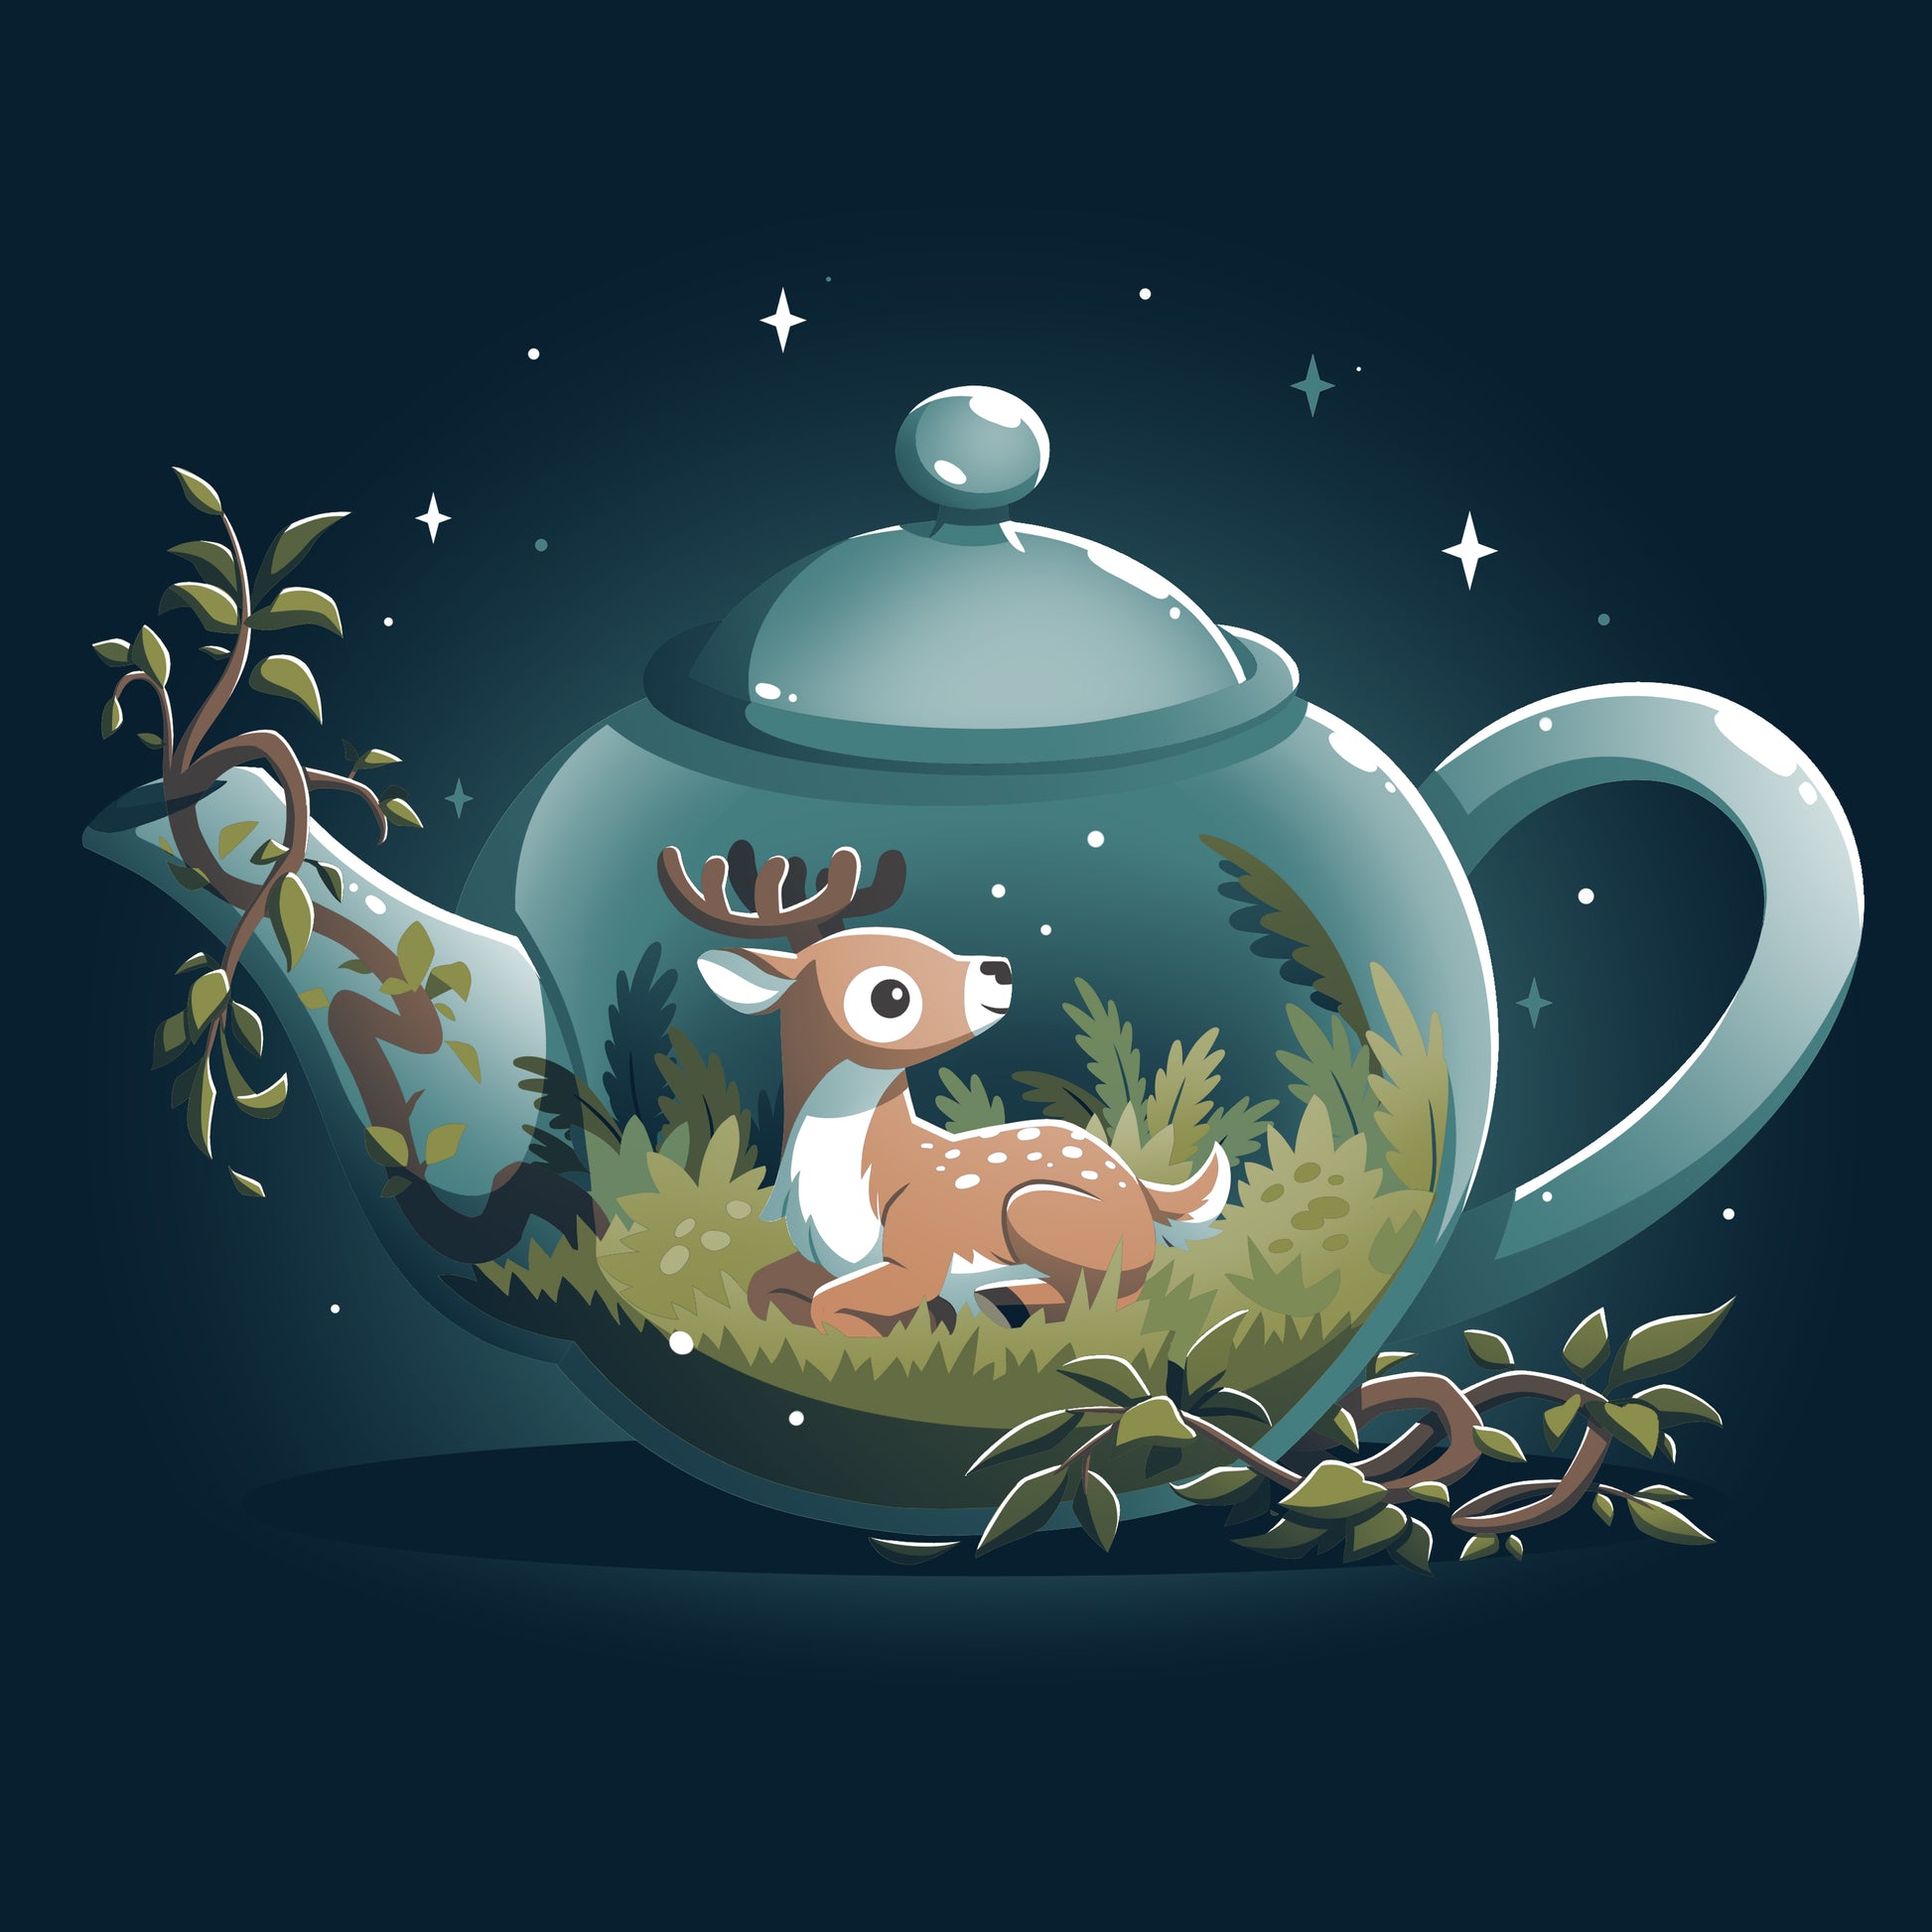 A peaceful illustration of a deer resting in the TeeTurtle Tea Pot Den, perfect for a t-shirt design.